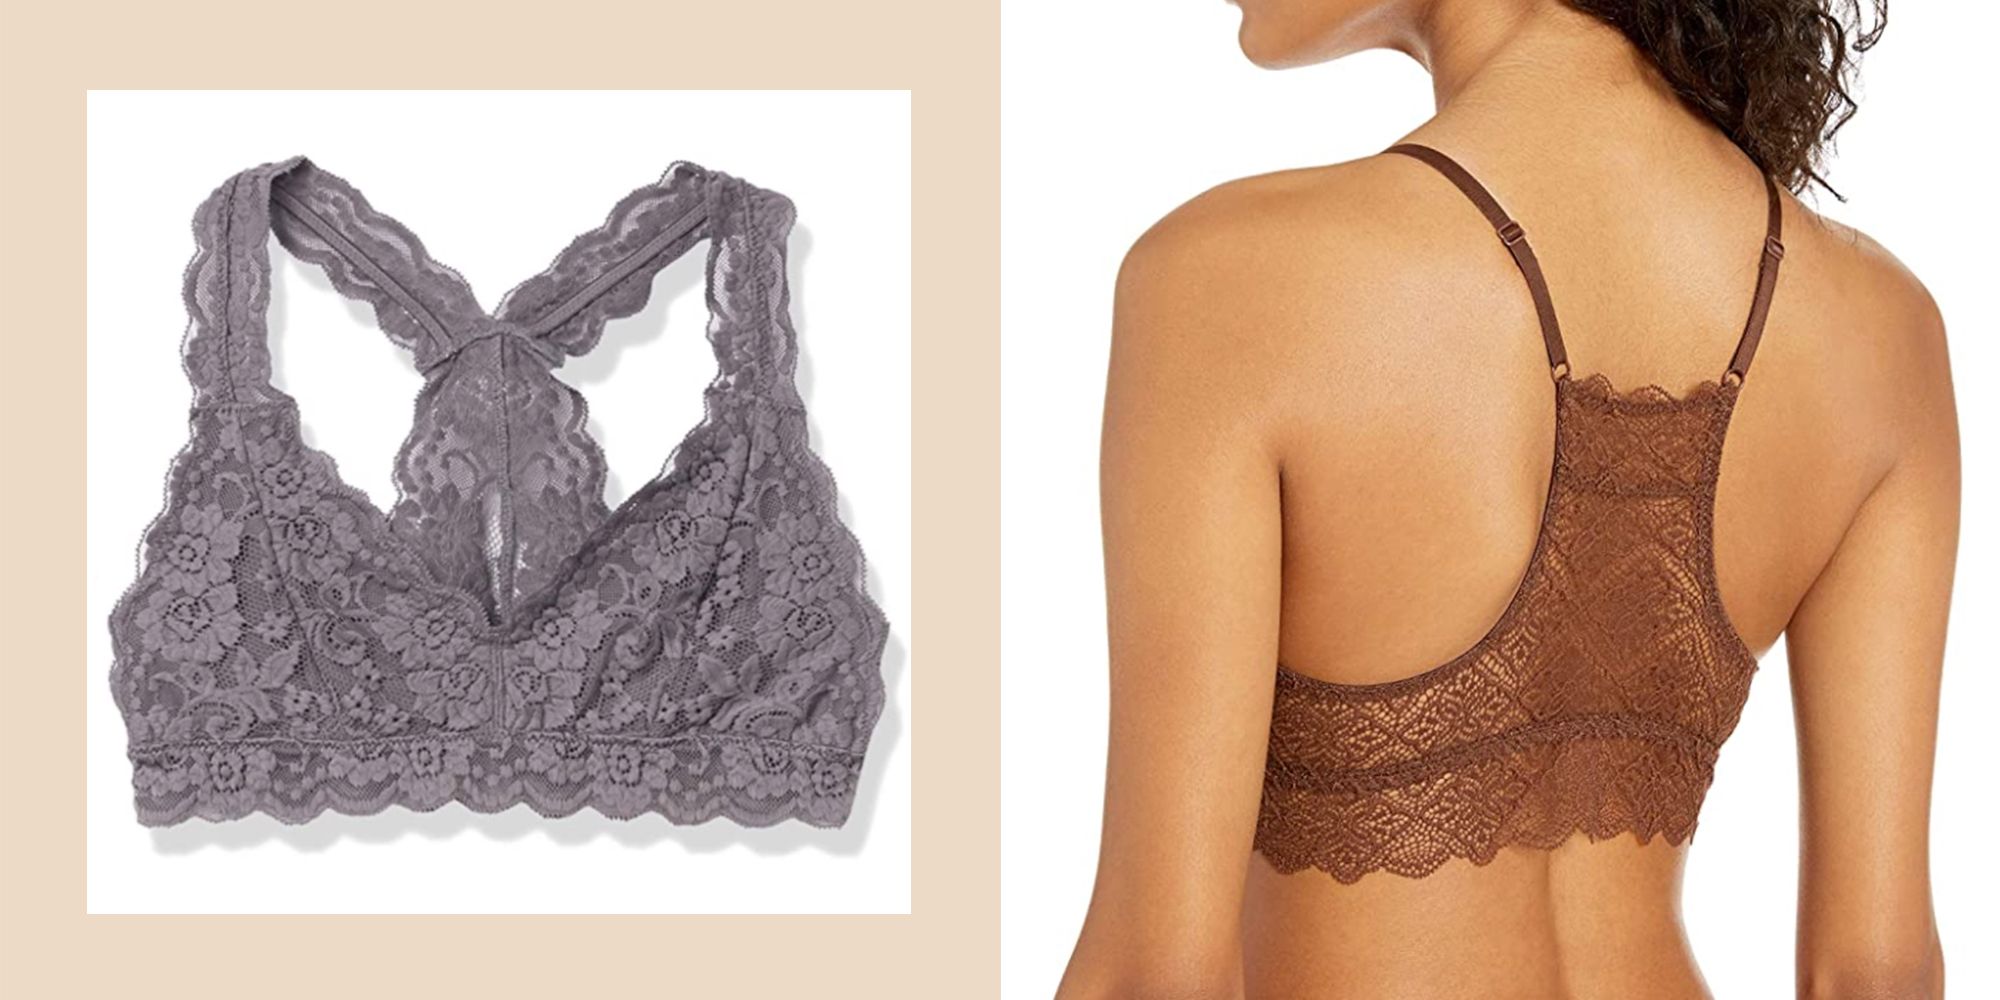 LASCANA on X: #Bras so stylish they should be seen! Stay cool